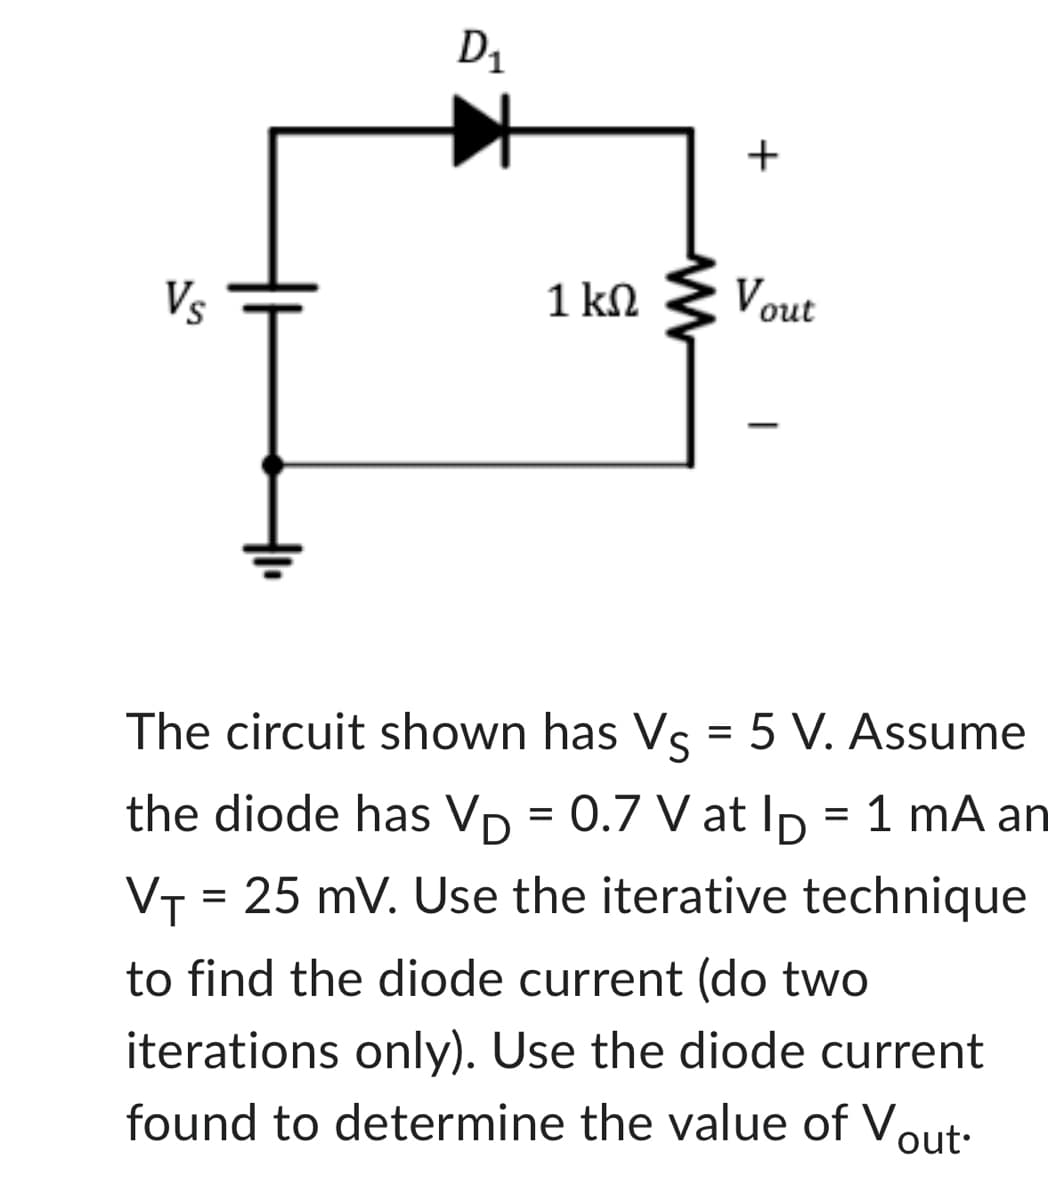 Vs
D₁
1 ΚΩ
www
+
Vout
The circuit shown has Vs = 5 V. Assume
the diode has VD = 0.7 V at lp = 1 mA an
VT = 25 mV. Use the iterative technique
to find the diode current (do two
iterations only). Use the diode current
found to determine the value of Vout.